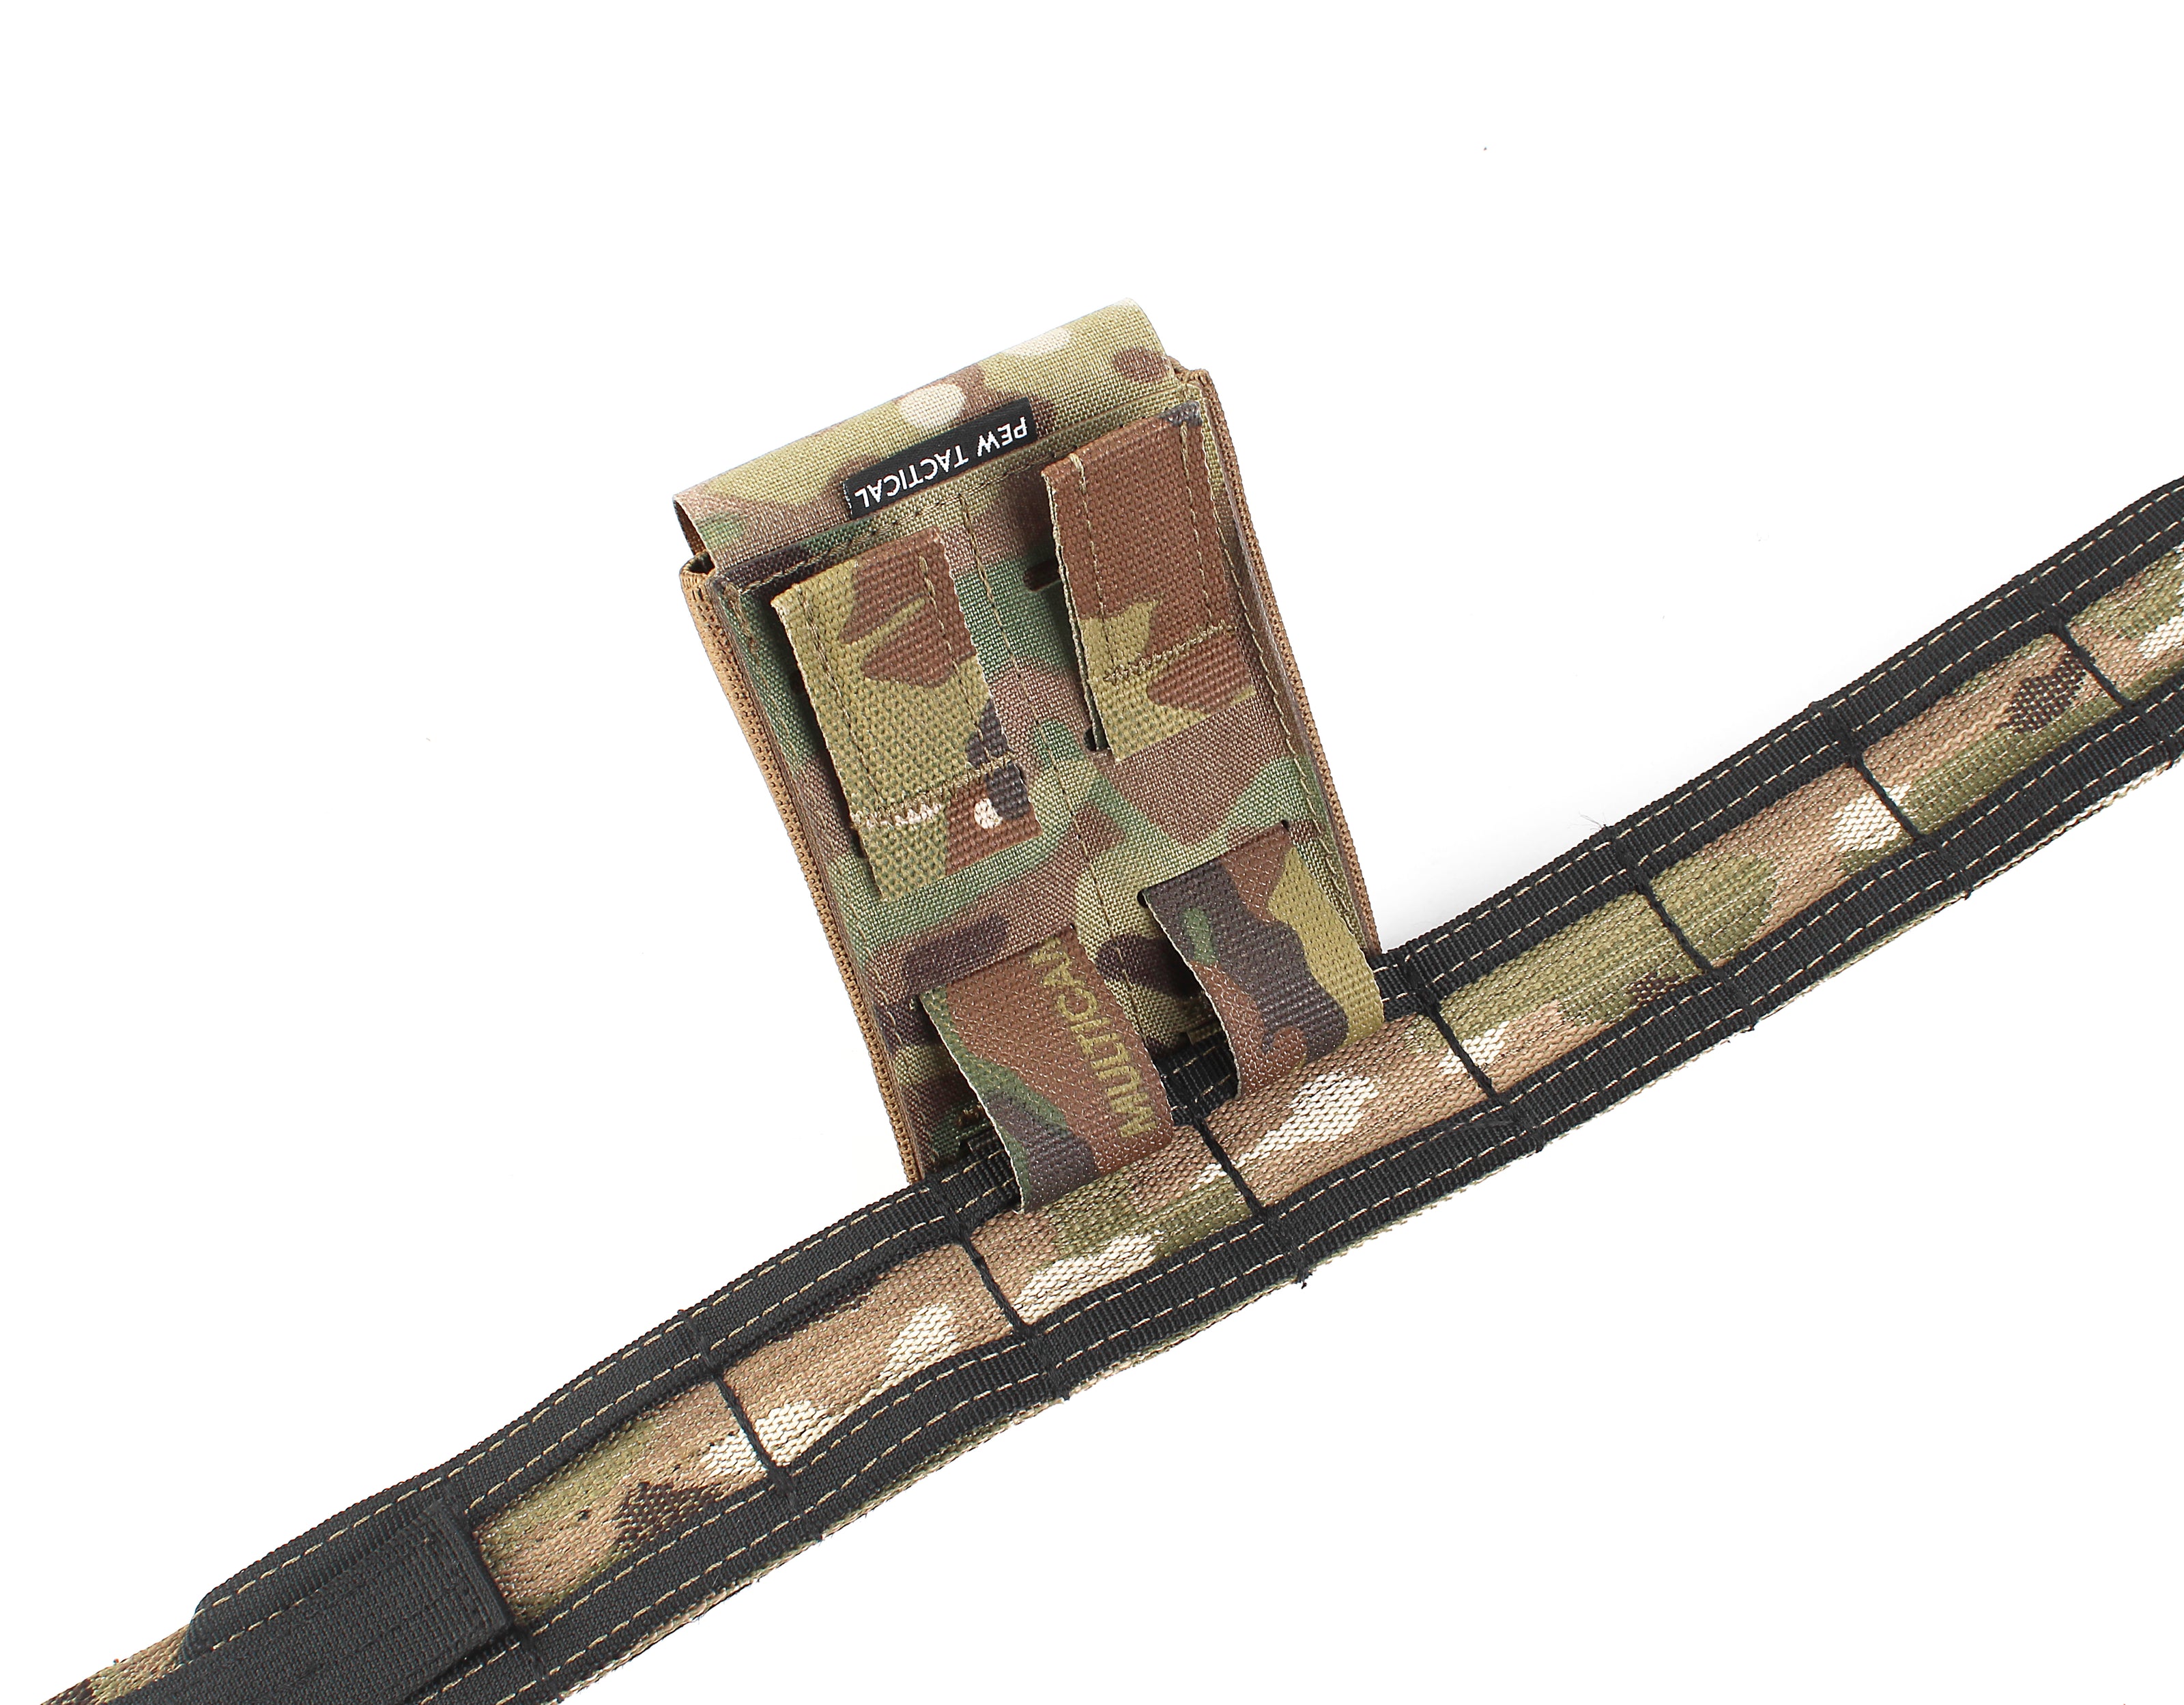 GBRS Style Single Rifle Mag Pouch